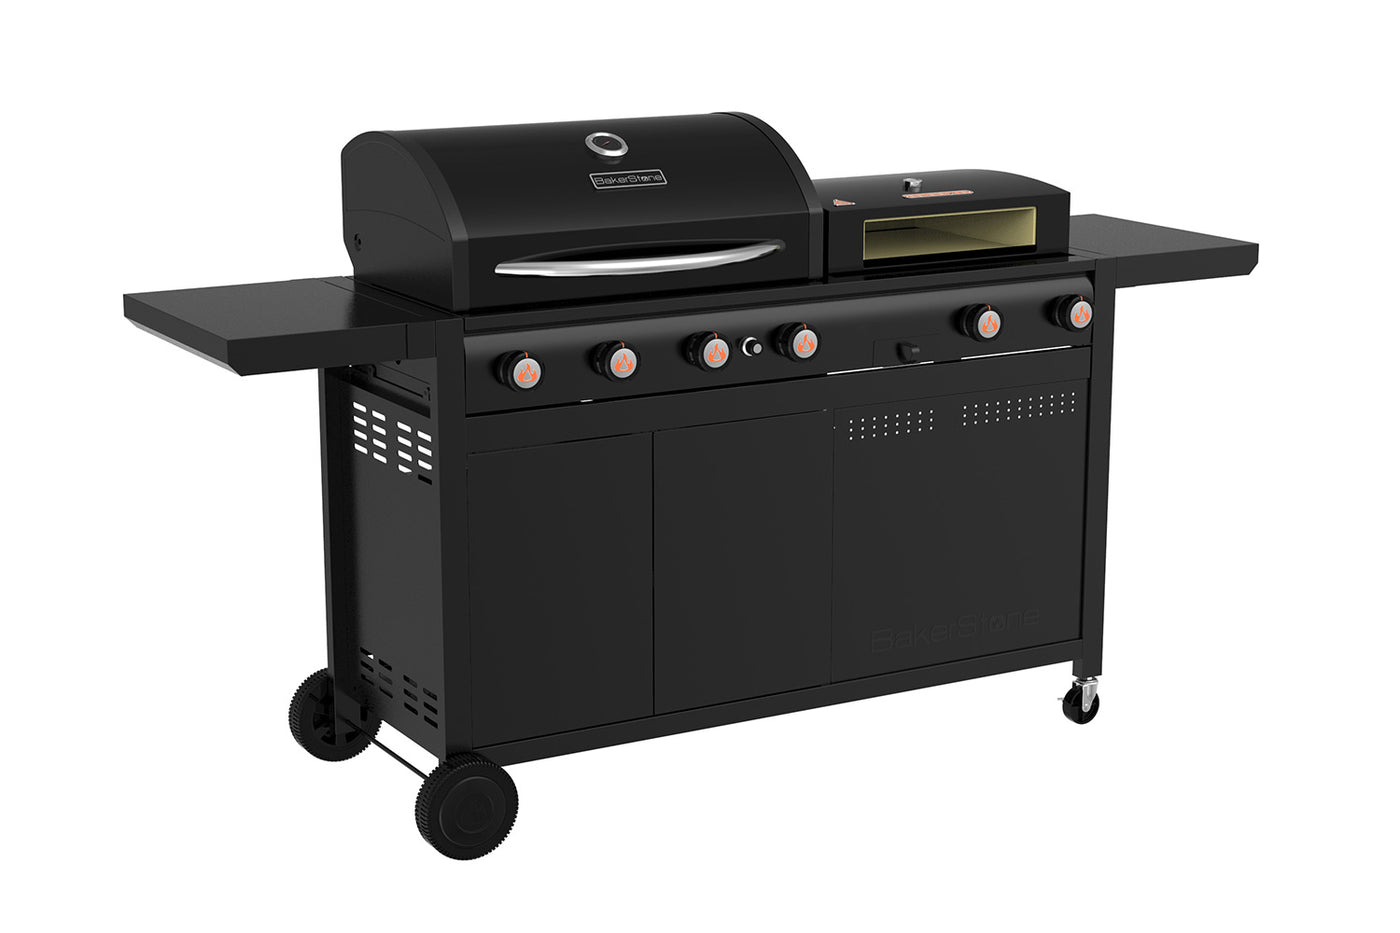 Outdoor Cooking Centers(BSO4501-EBK-OOO-000)